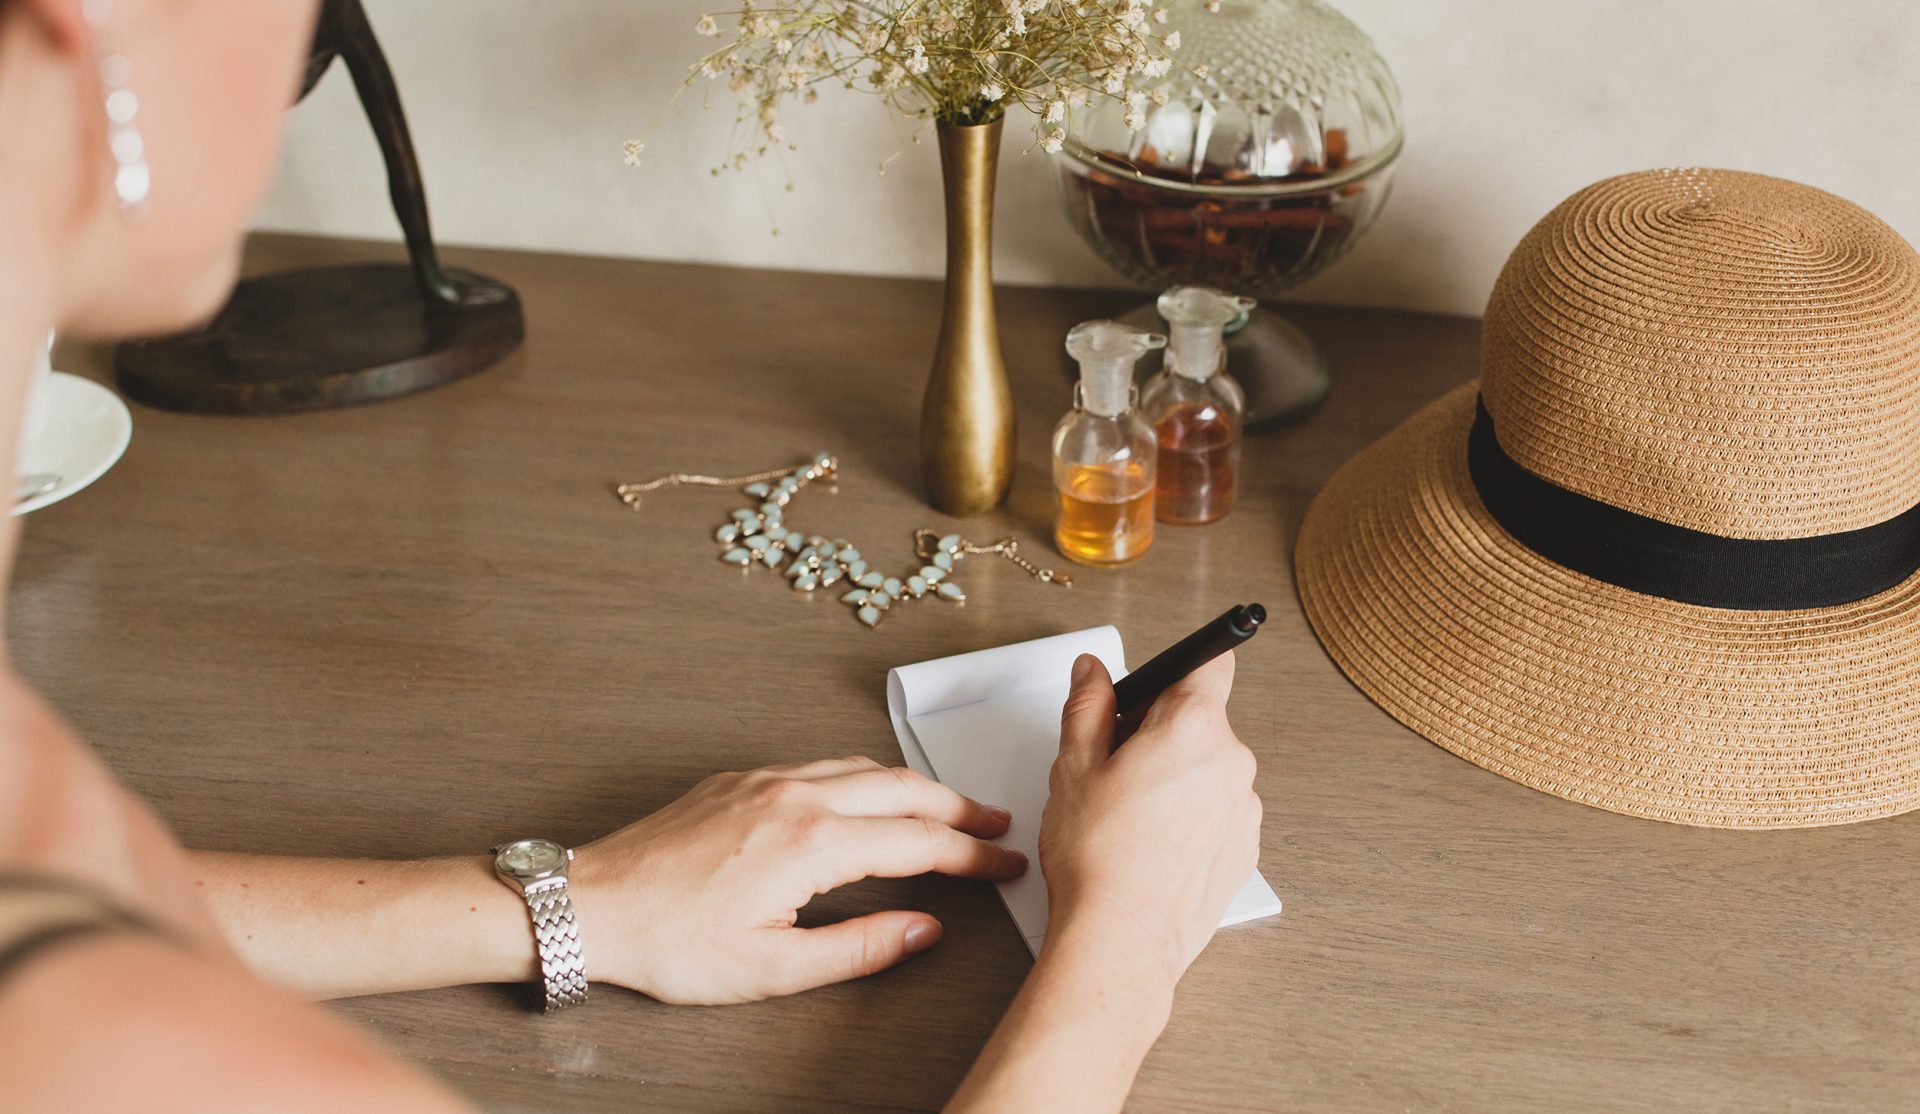 young stylish beautiful woman sitting at table in resort hotel room, writing a letter, holding pen, straw hat, vintage style, hands close-up, details, accessories, travel diary